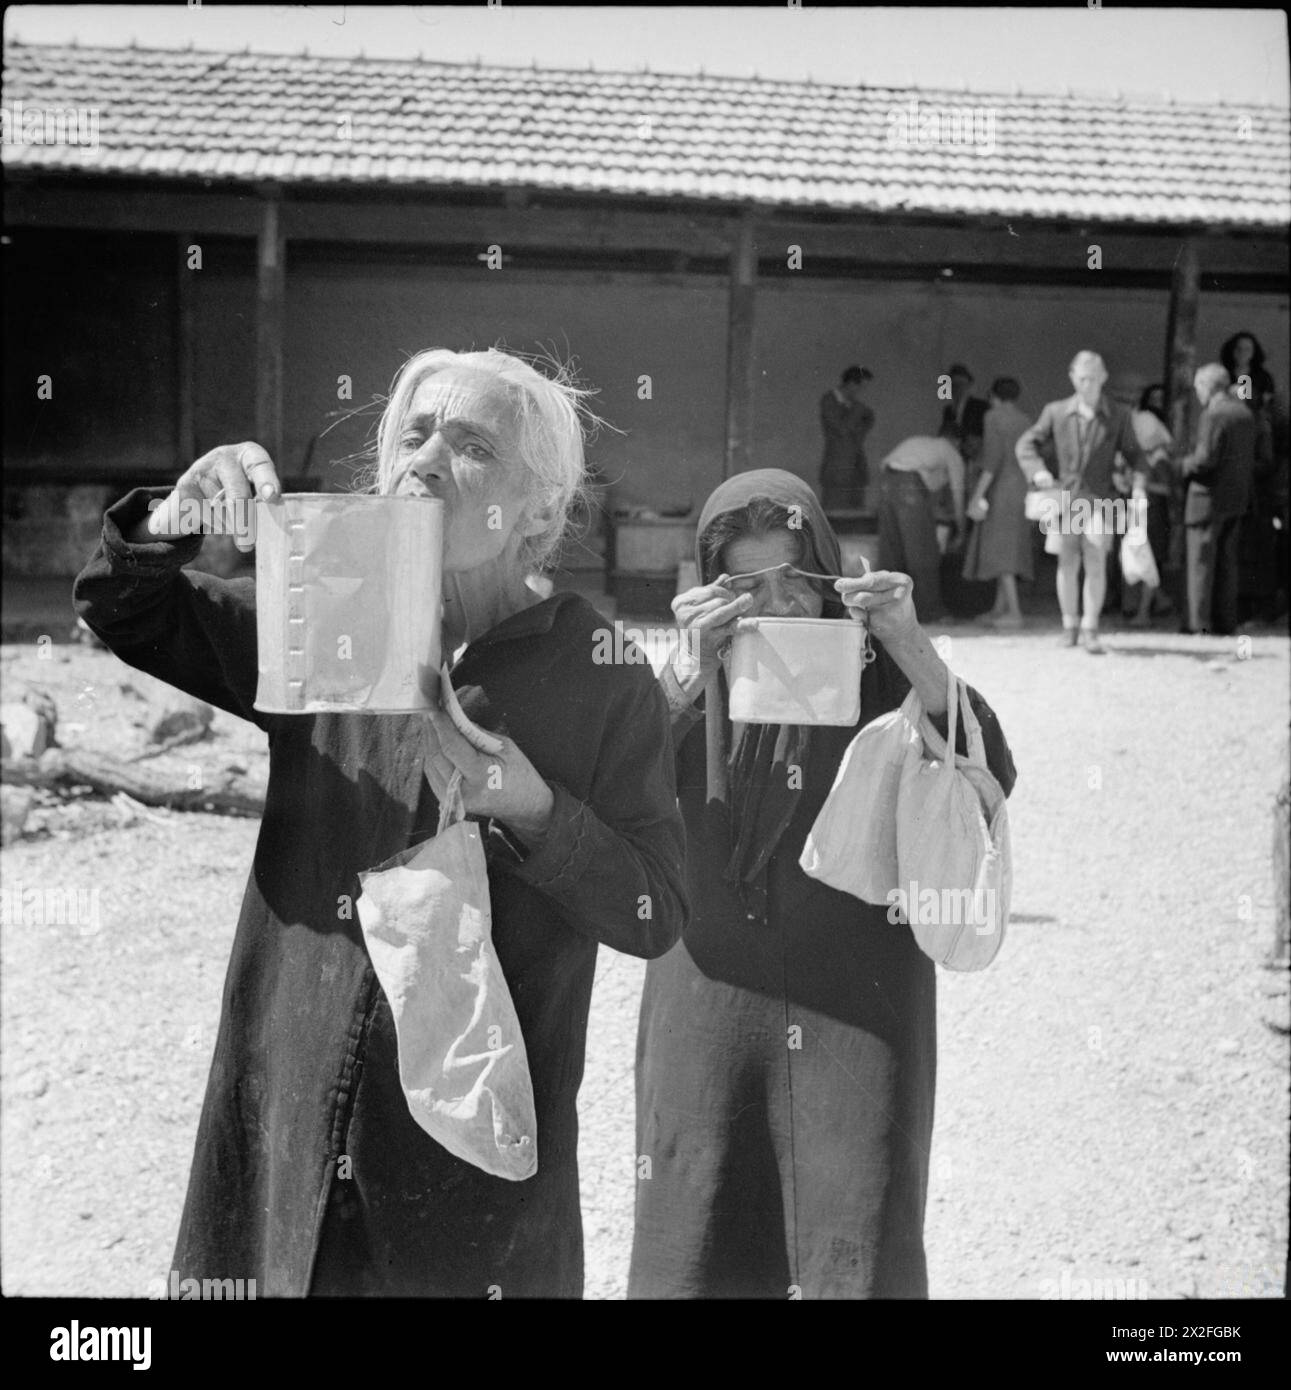 THE LIBERATION OF RHODES, 1945 - Two elderly Greek women sip their soup as they leave a Red Cross kitchen. They also carry bags so that they can call at a food distribution centre to collect their rations. During the German occupation the local inhabitants had suffered the effects of malnutrition due to insufficient food. After the liberation of the island the British quickly began to organize food supplies, issuing people with ration books and distributing essential food stuffs. Red Cross kitchens also assisted by providing nourishing soup Stock Photo